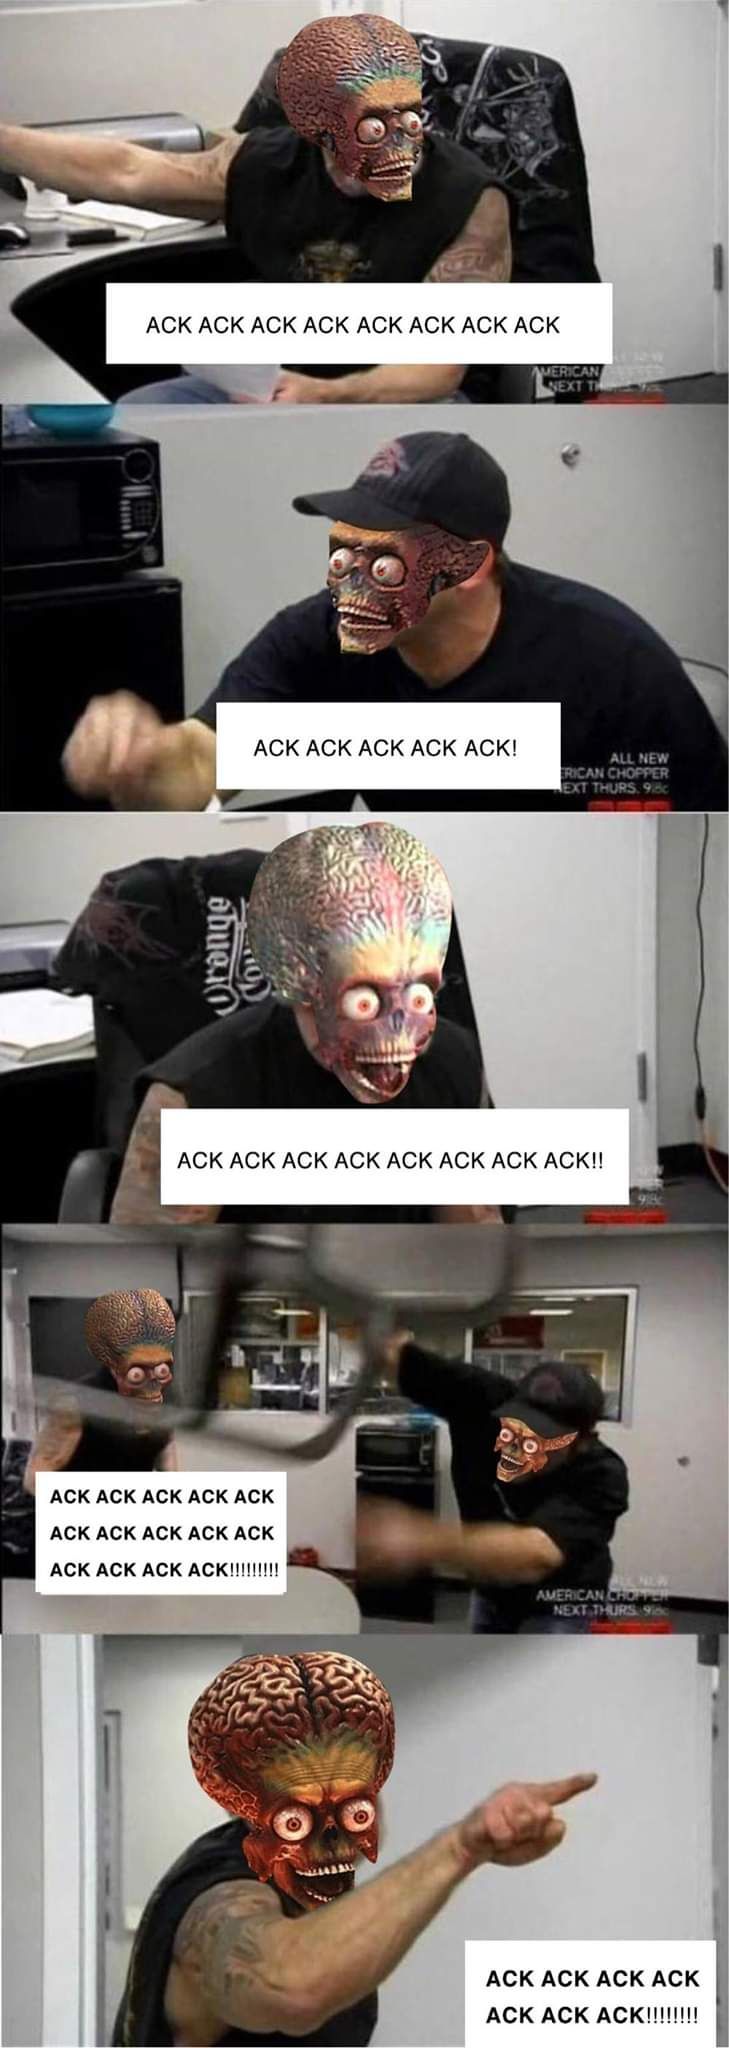 Mars Attacks is a great movie